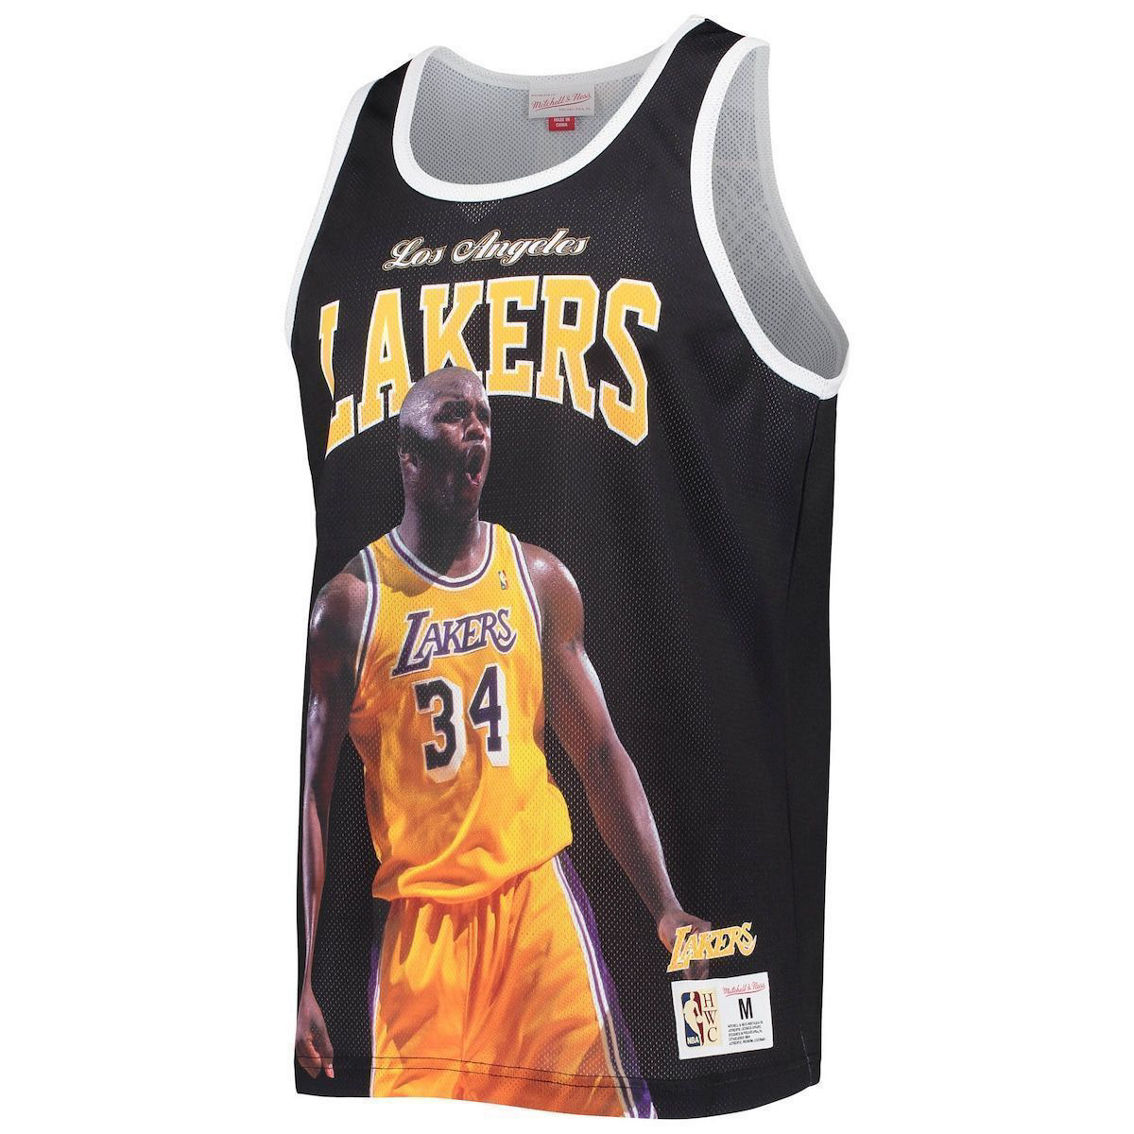 Mitchell & Ness Men's Shaquille O'Neal Black Los Angeles Lakers Hardwood Classics Player Tank Top - Image 3 of 4